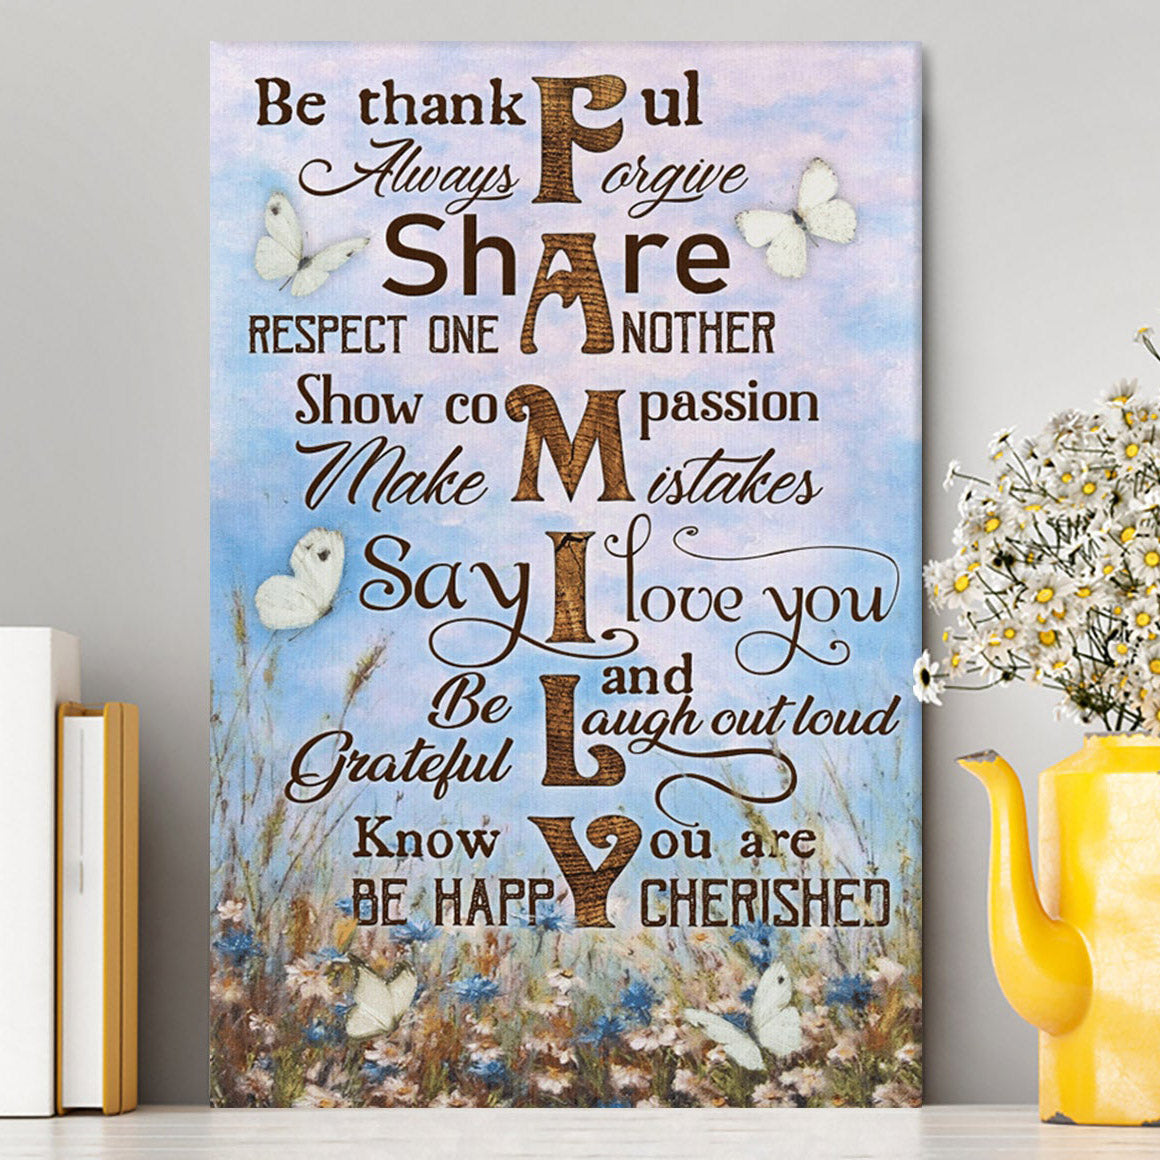 Be Thankful Always Forgive Share Respect One Another Show Compassion Make Mistakes Know You Are Cherished Christian Wall Art Decor